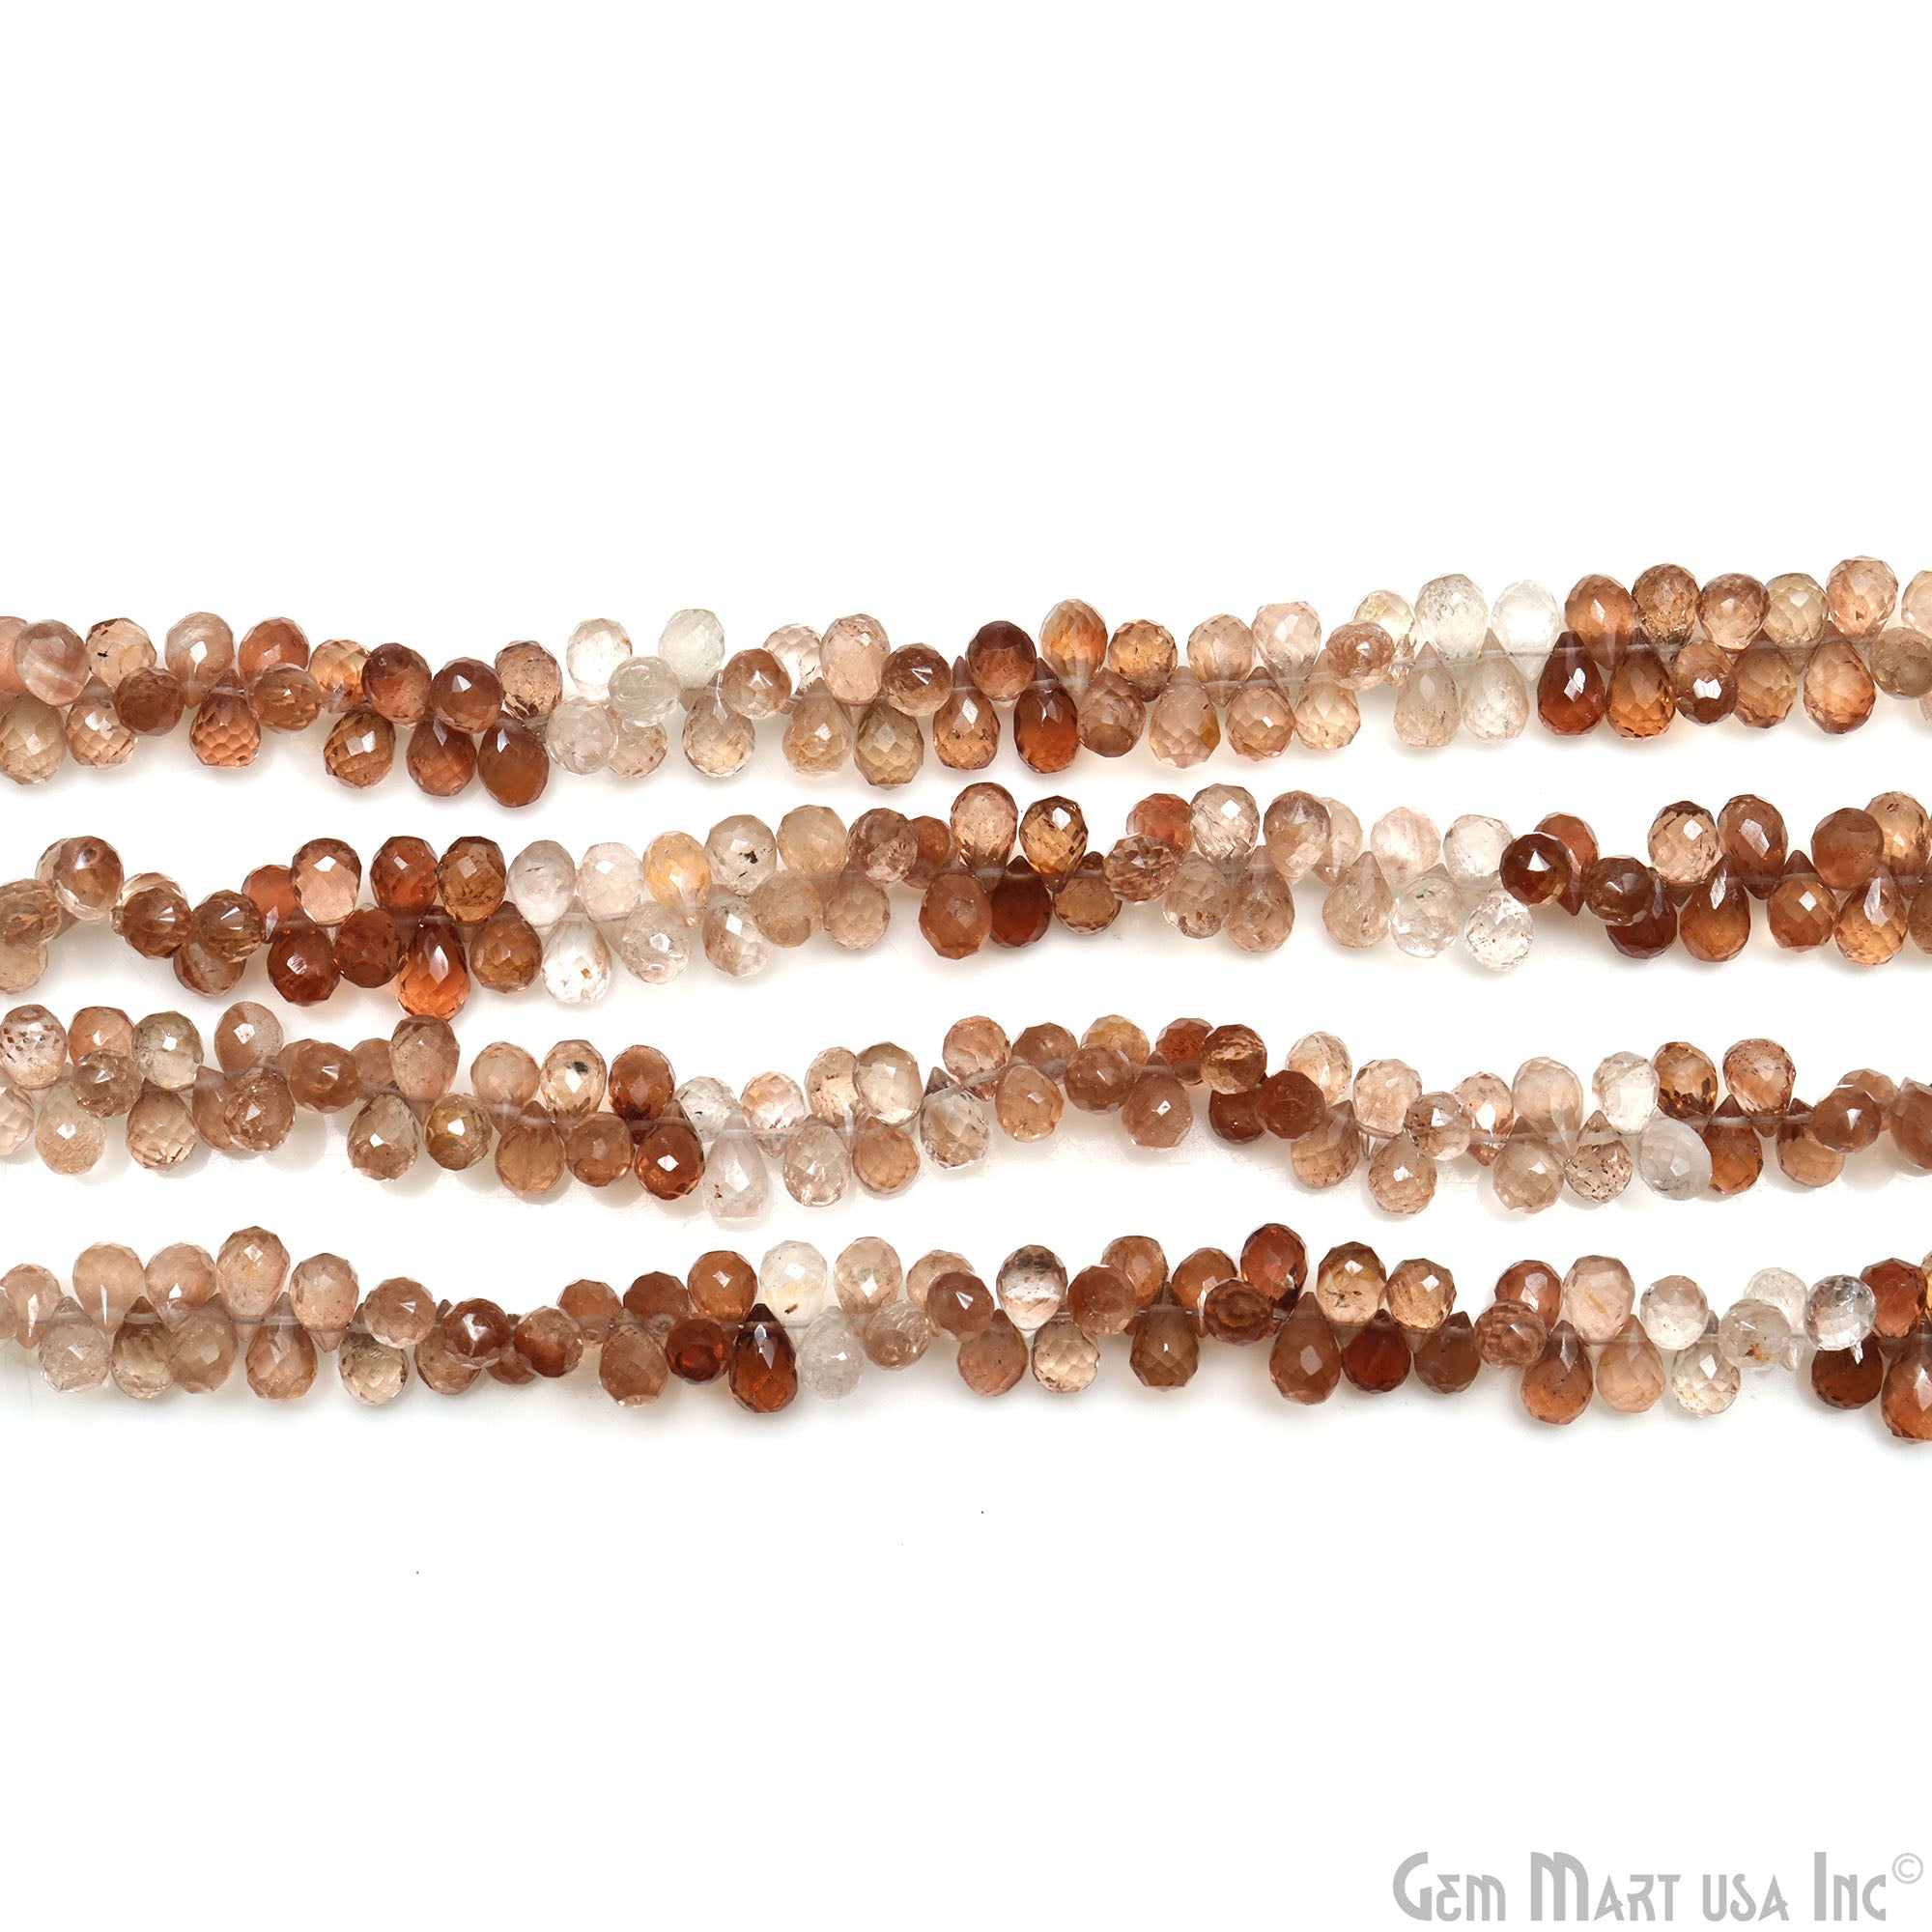 Golden Rutile Shaded 7x5mm Faceted Gemstone Rondelle Beads 1 Strand 9 Inch